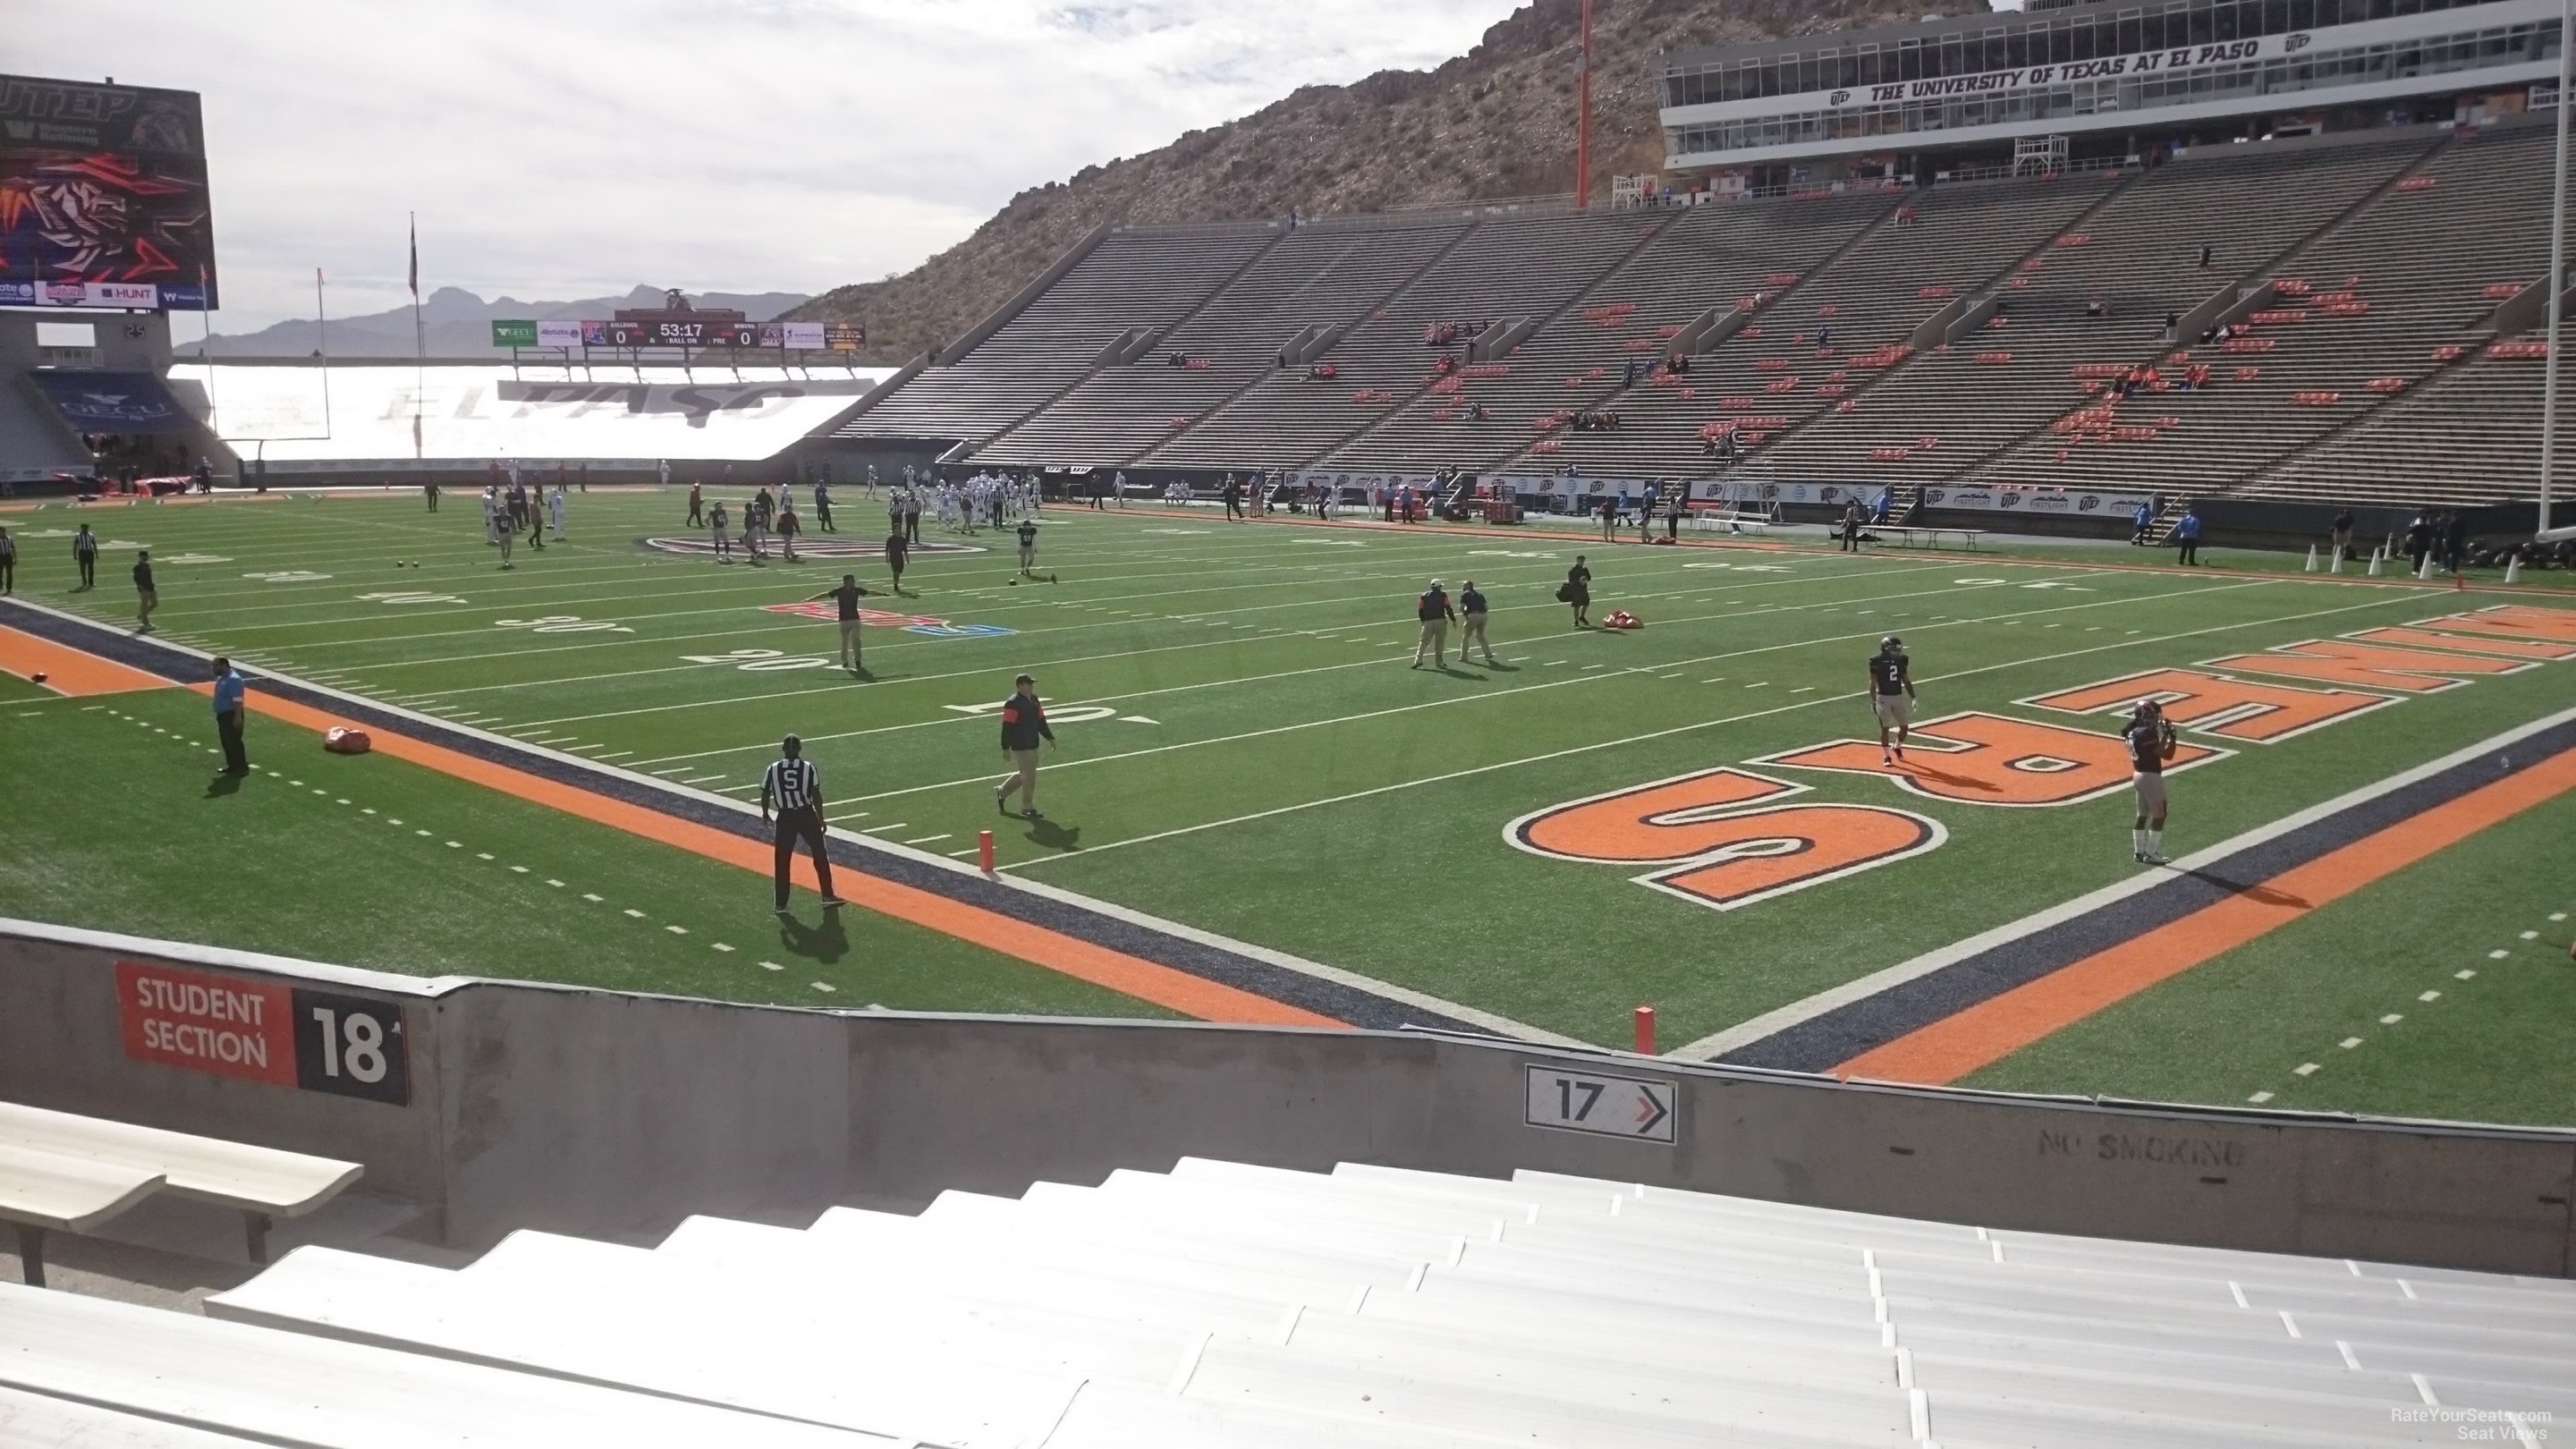 section 17, row 15 seat view  for football - sun bowl